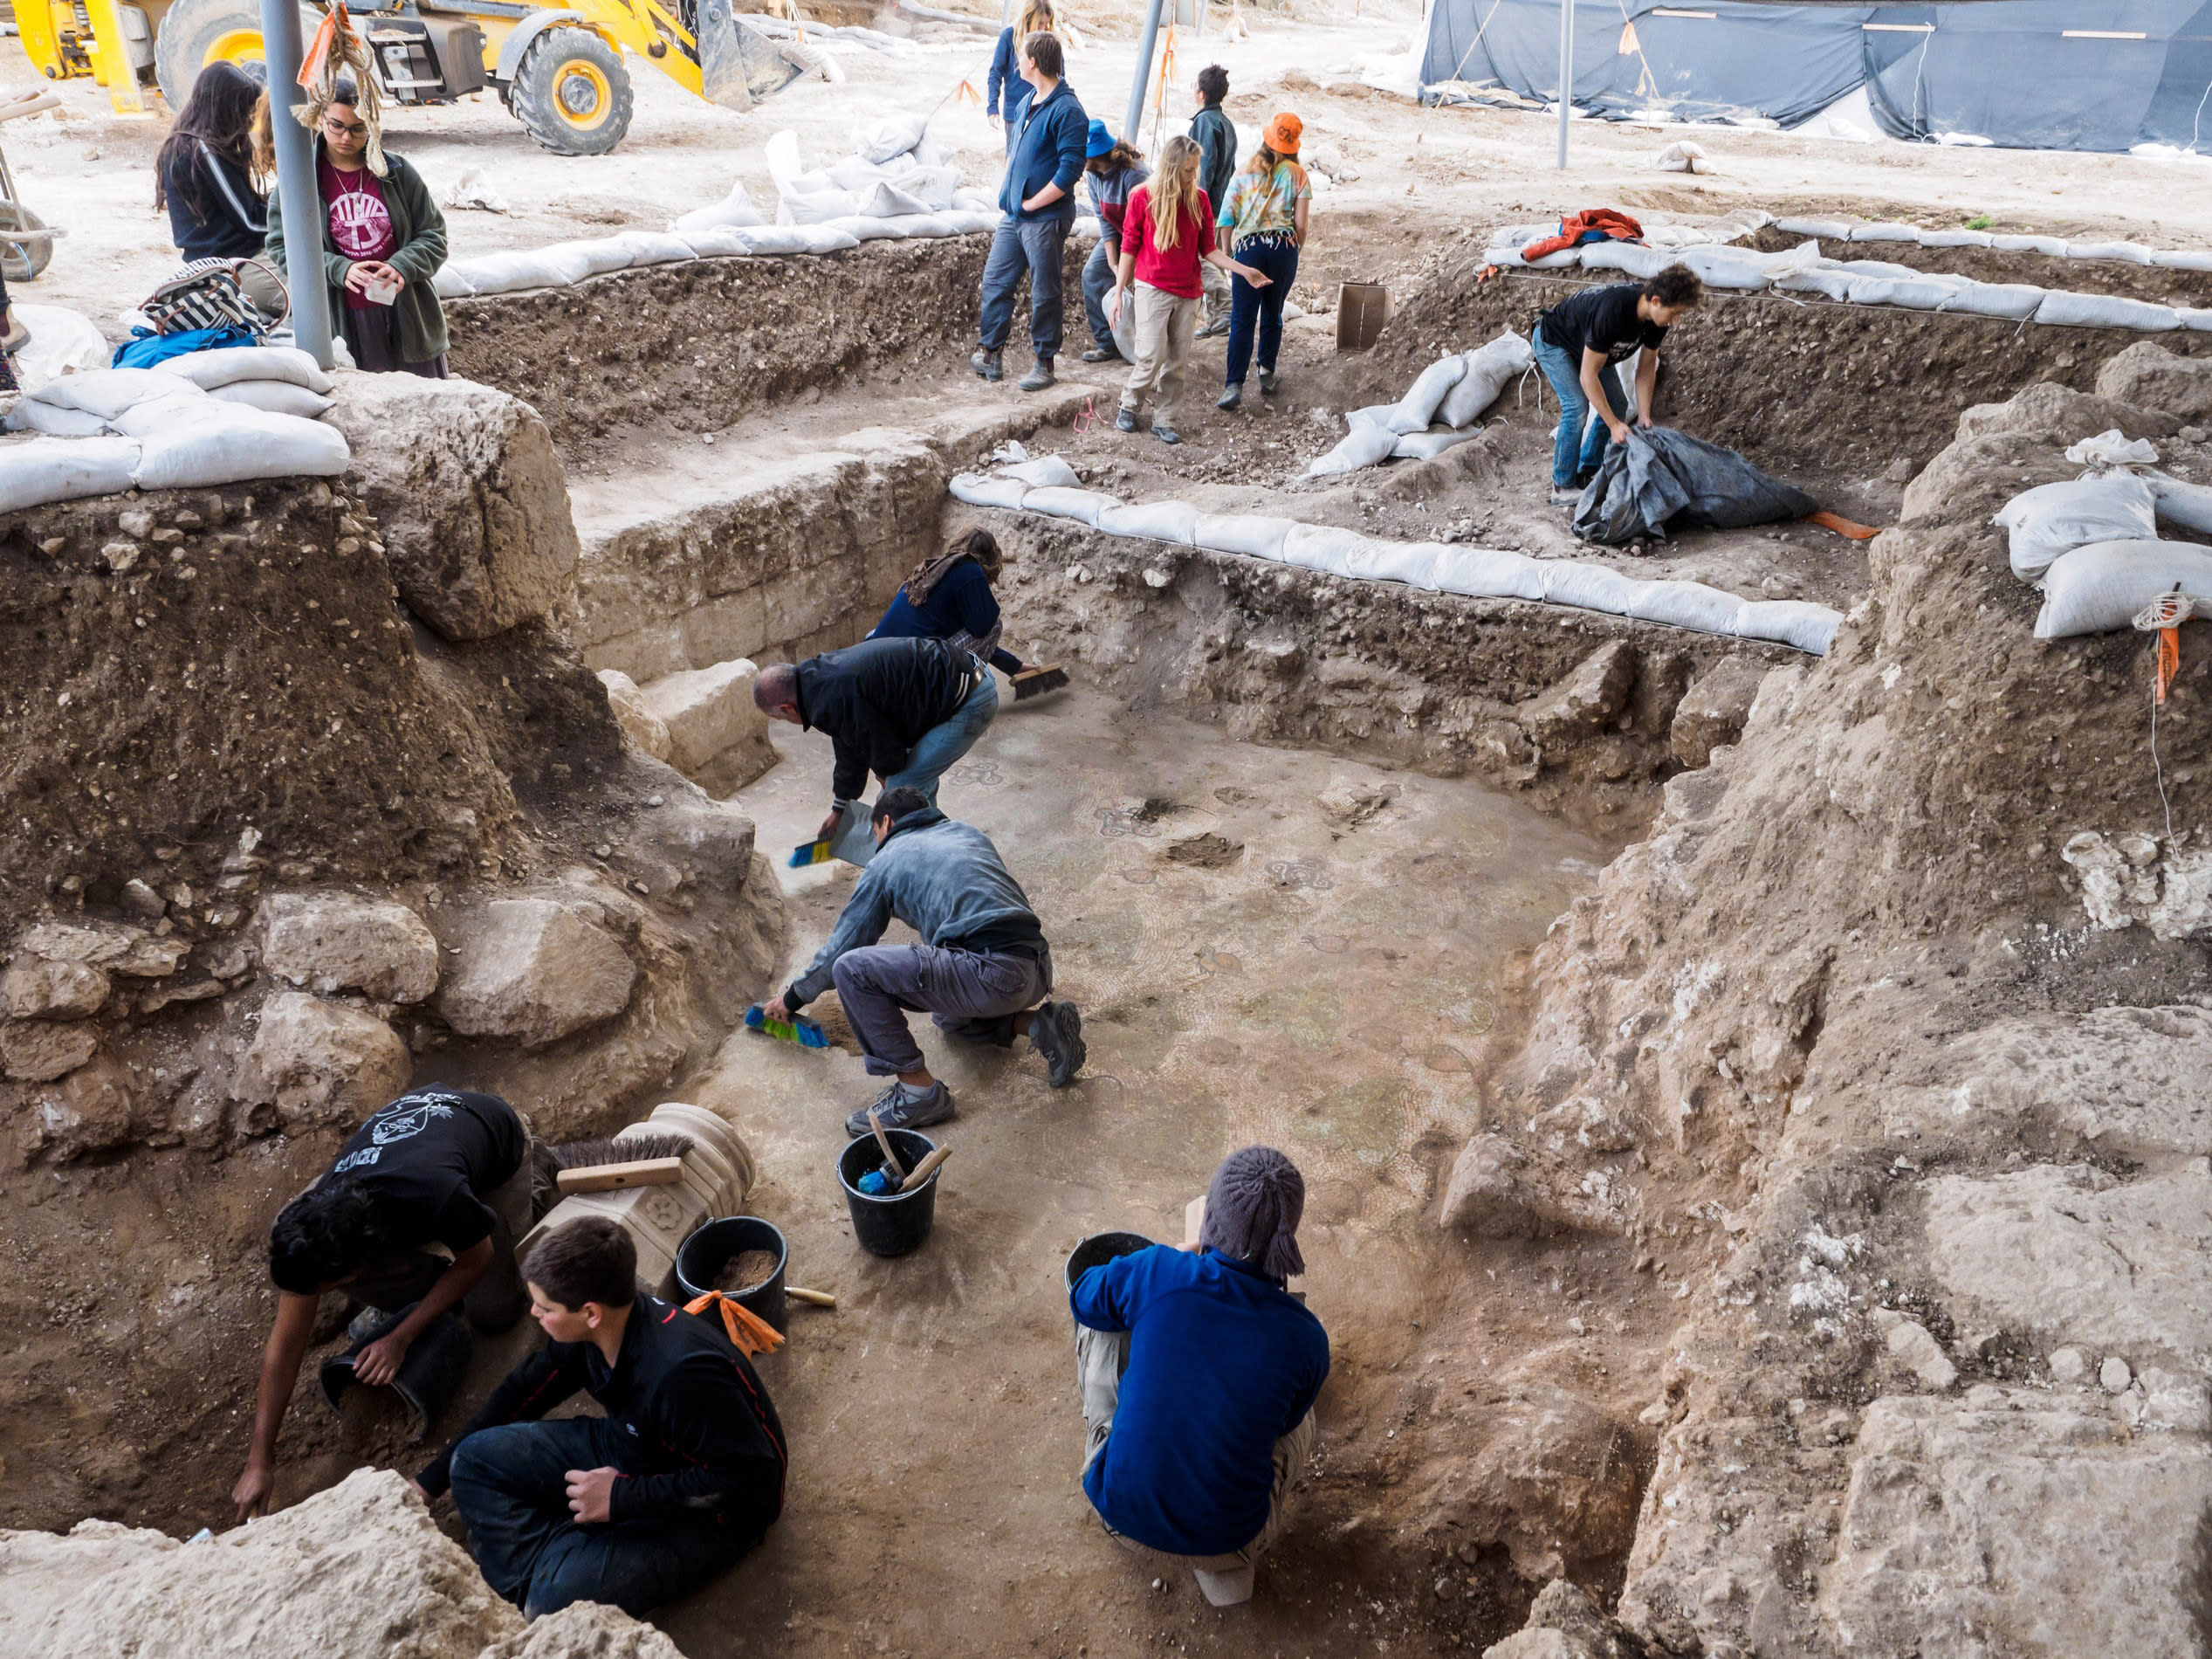 Archeologists at the excavation site. (ASSAF PEREZ, COURTESY OF IAA)